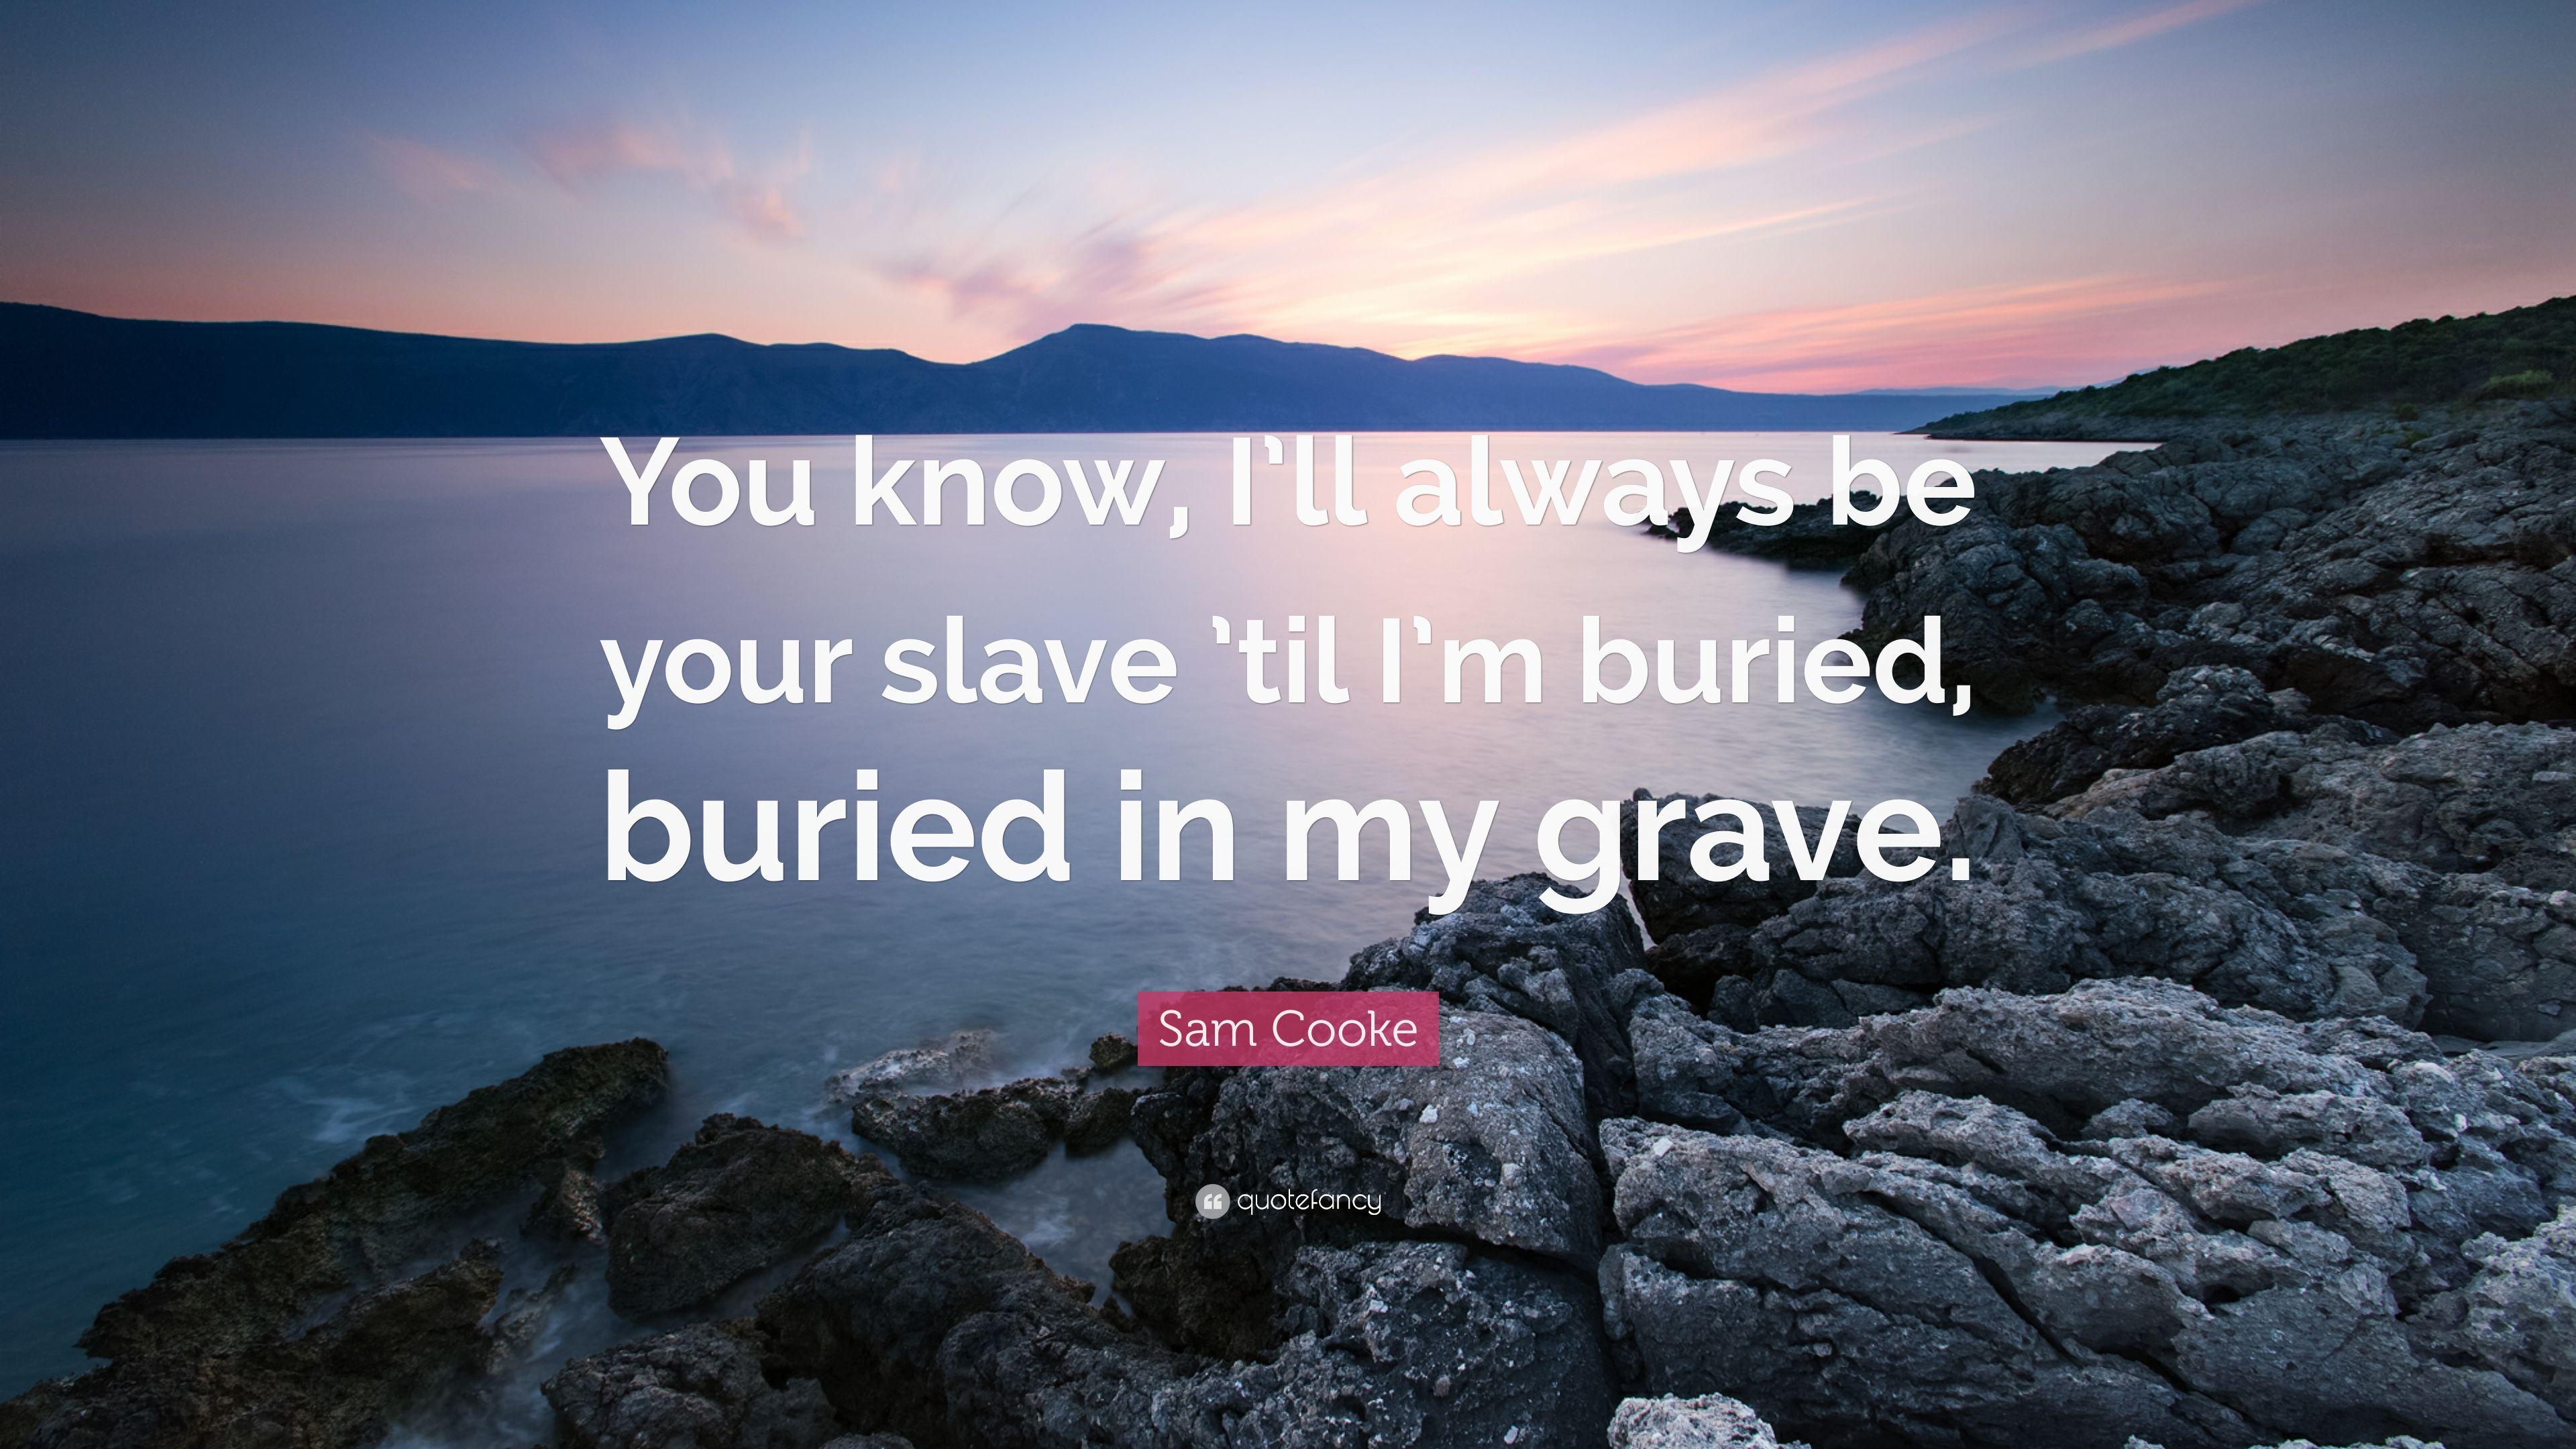 Sam Cooke Quote: “You know, I'll always be your slave 'til I'm